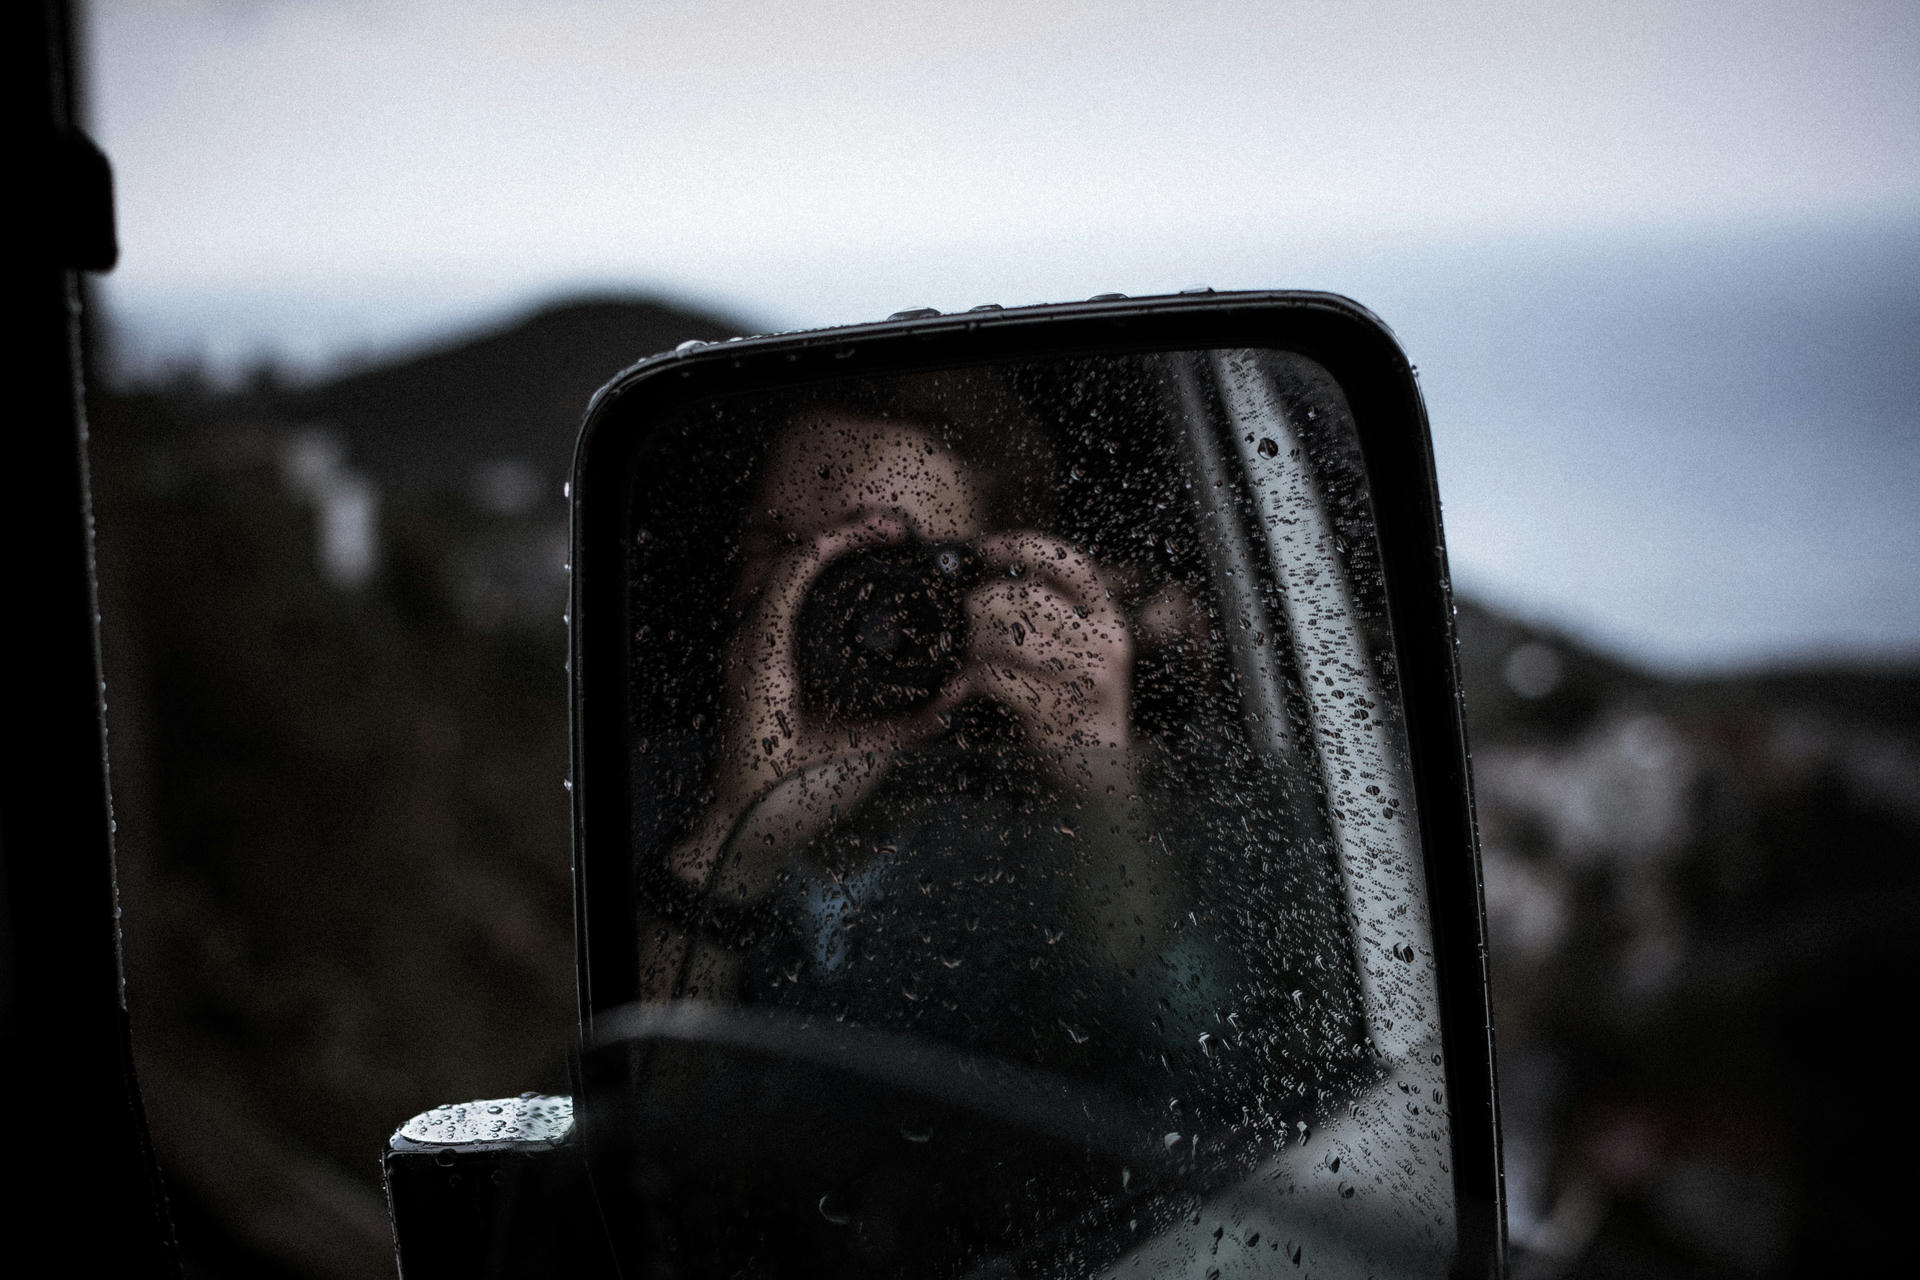 Photographing oneself in a rainy mirror.